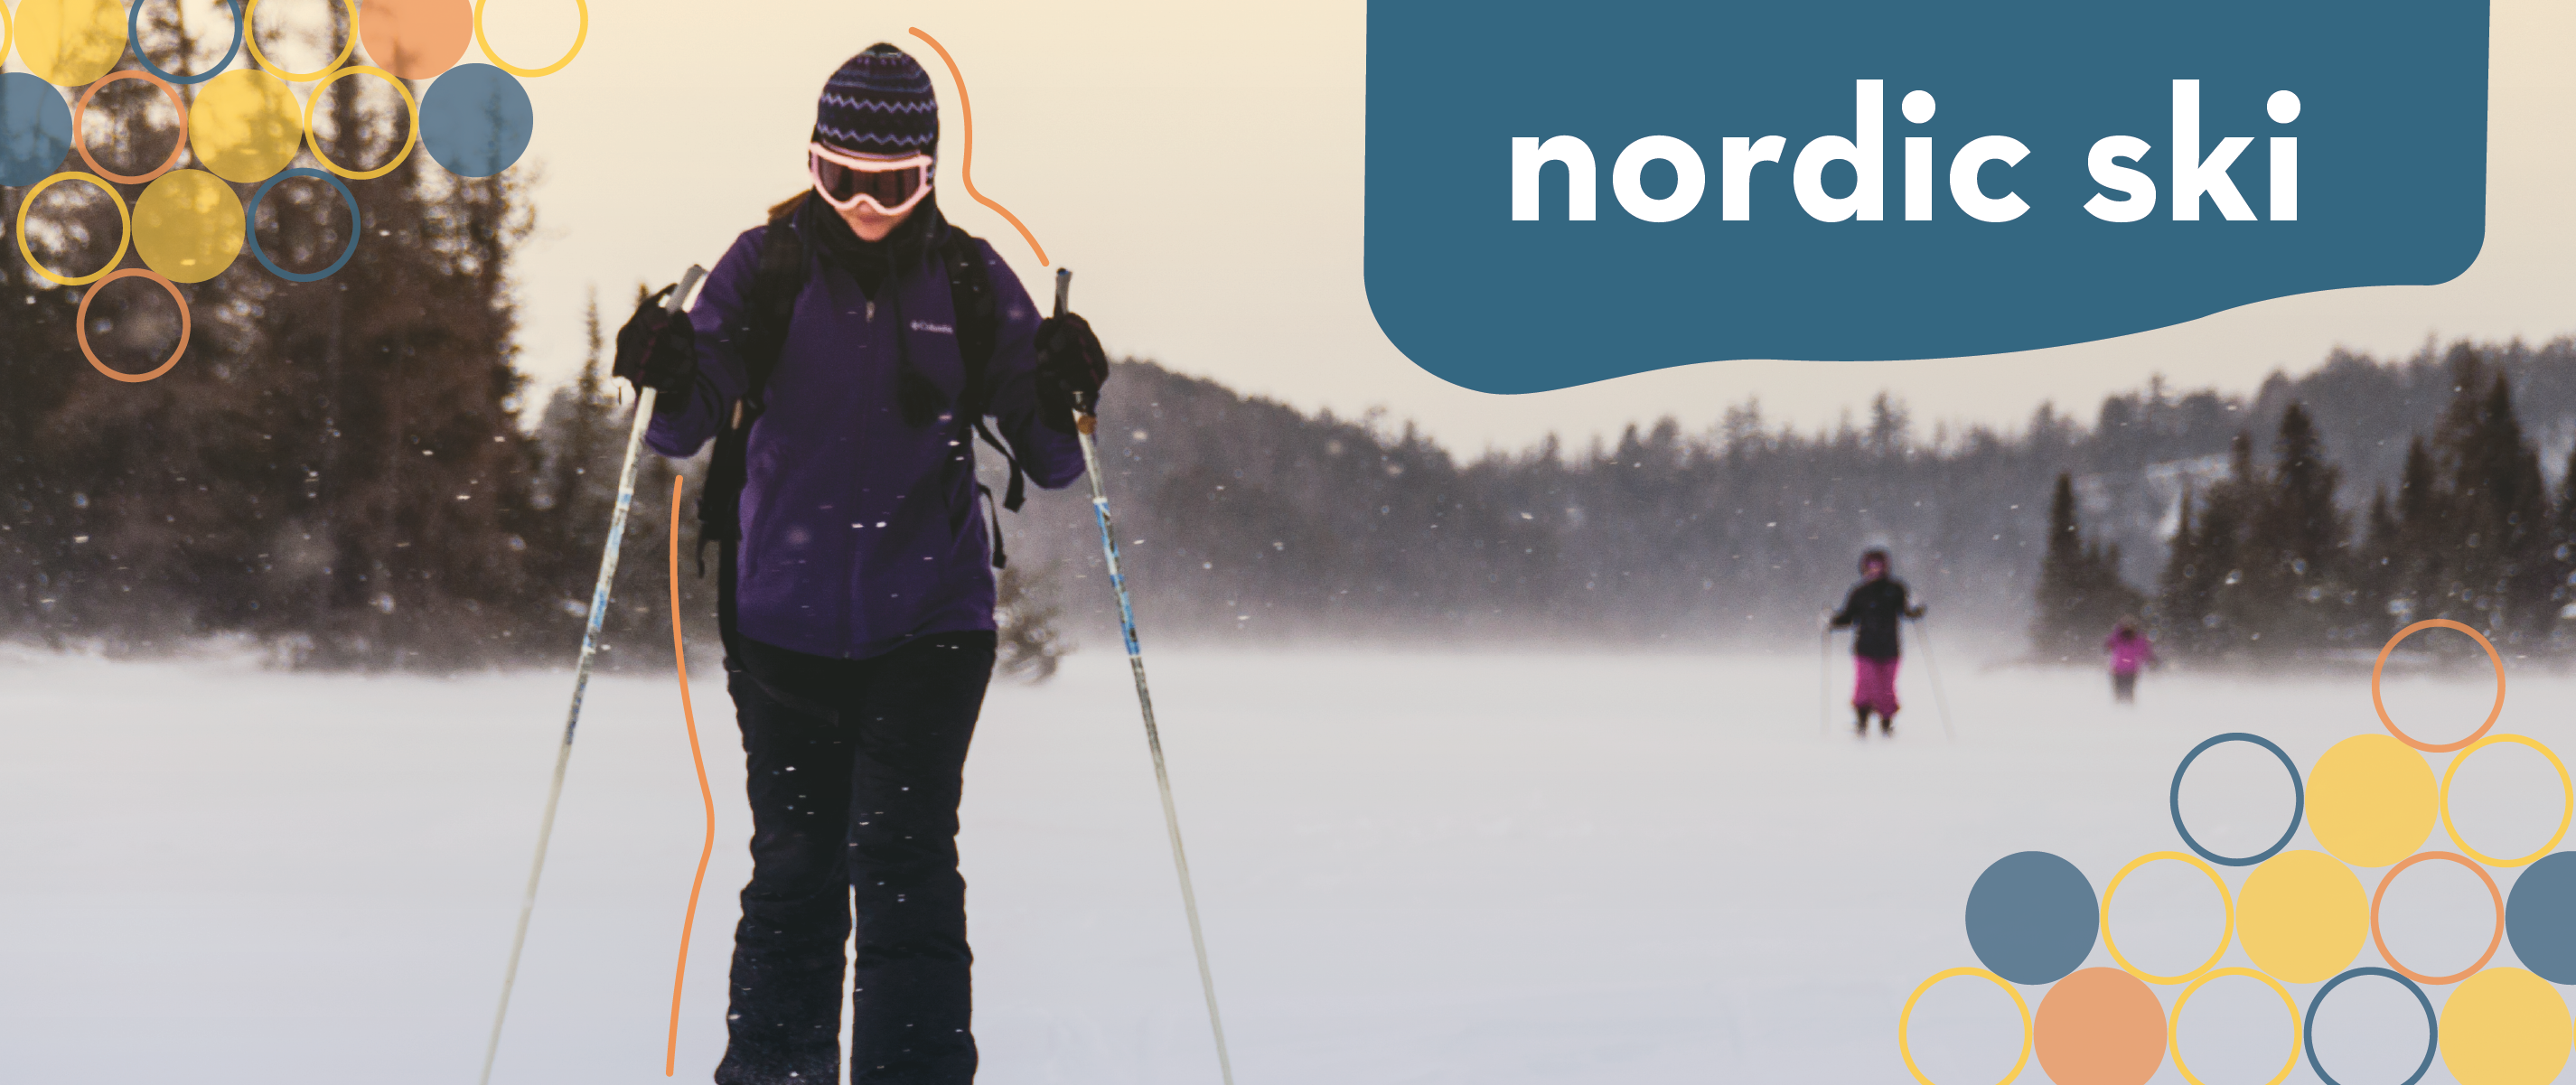 a header of an individual Nordic skiing with a sun set behind them with the title "nordic ski"